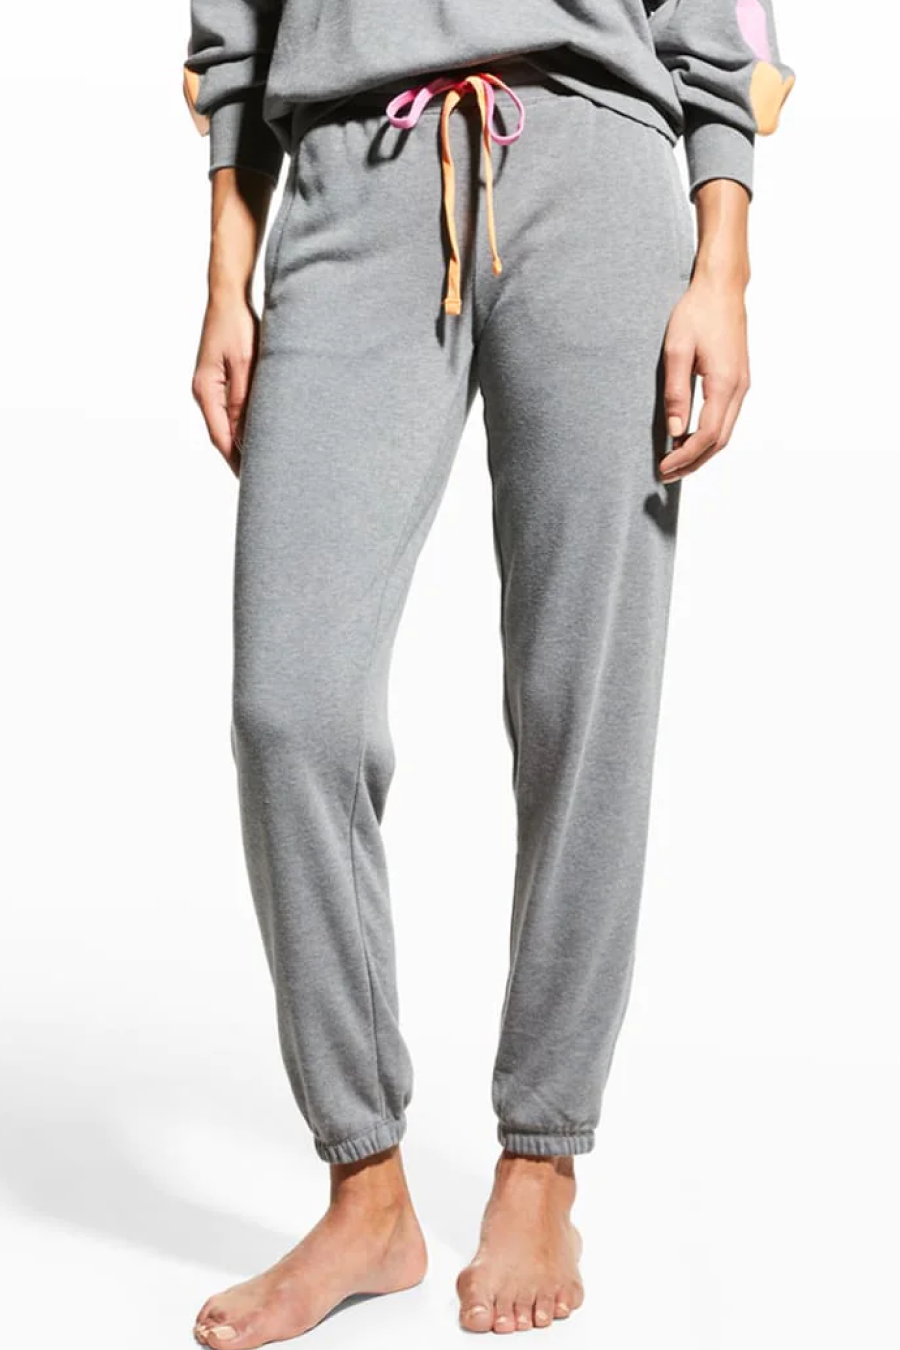 PJ Salvage Love In Color Hearts Band Pant